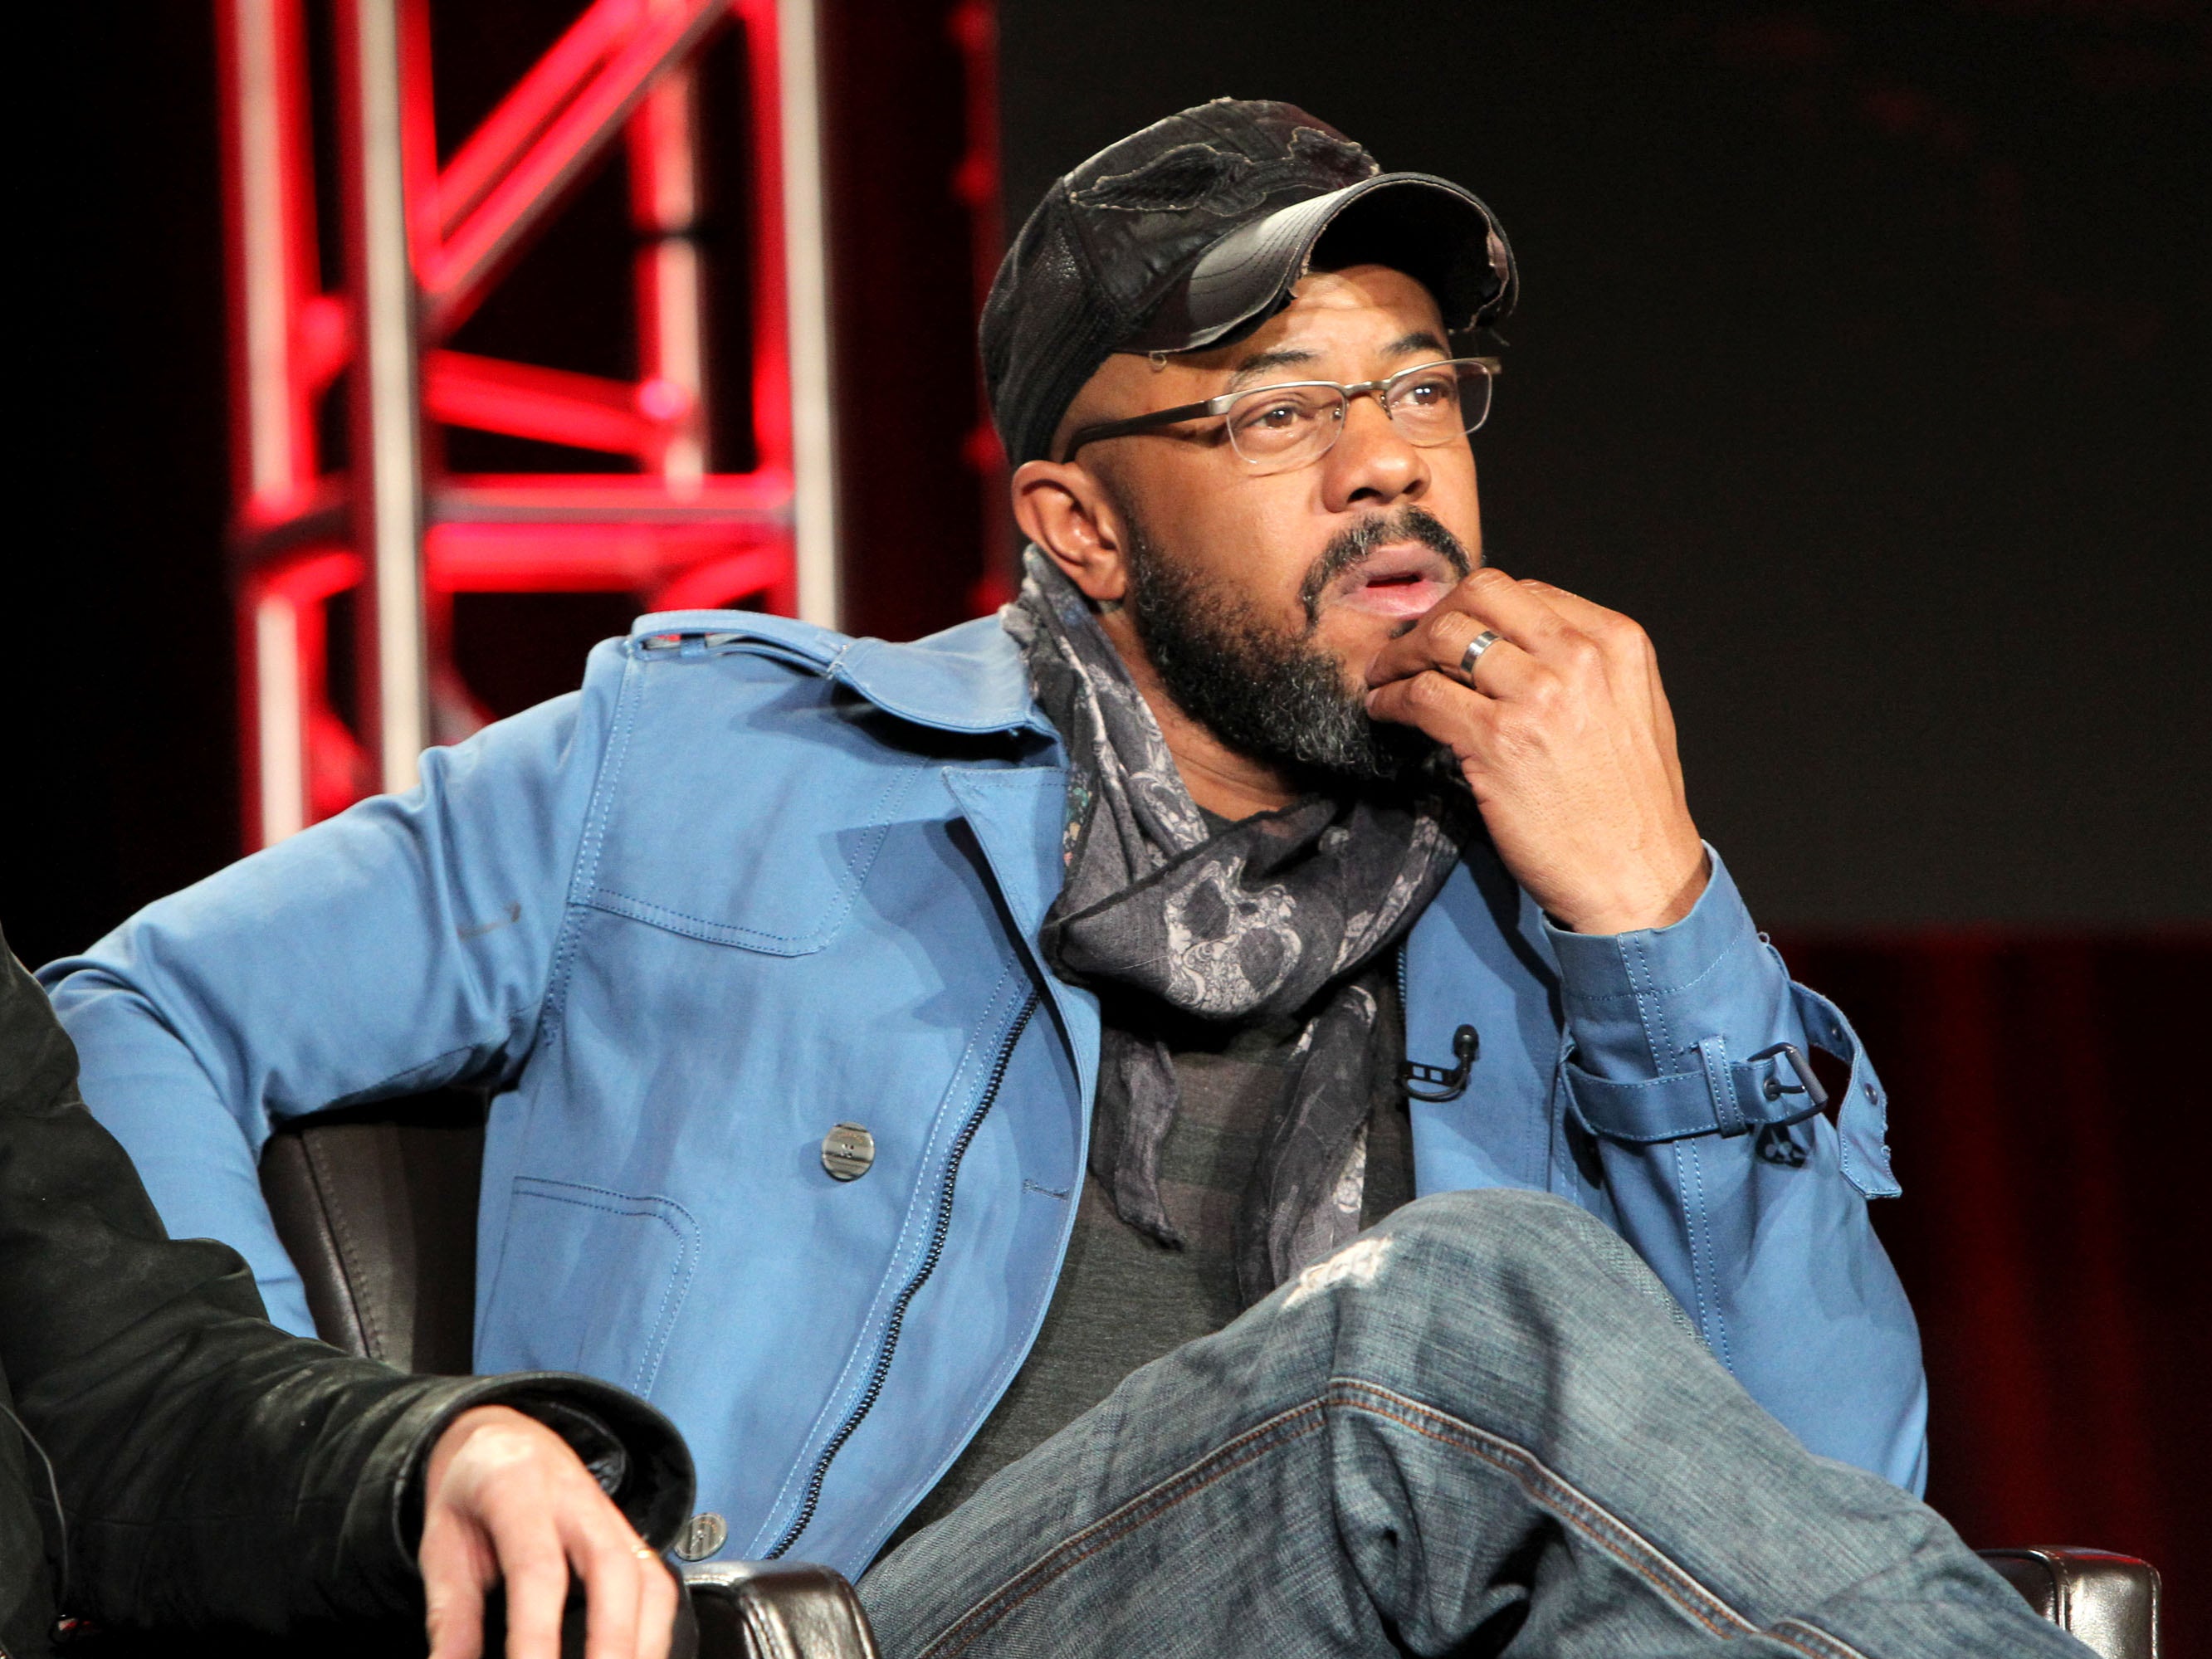 Rockmond Dunbar’s character Michael Grant was written out of the procedural drama in season five